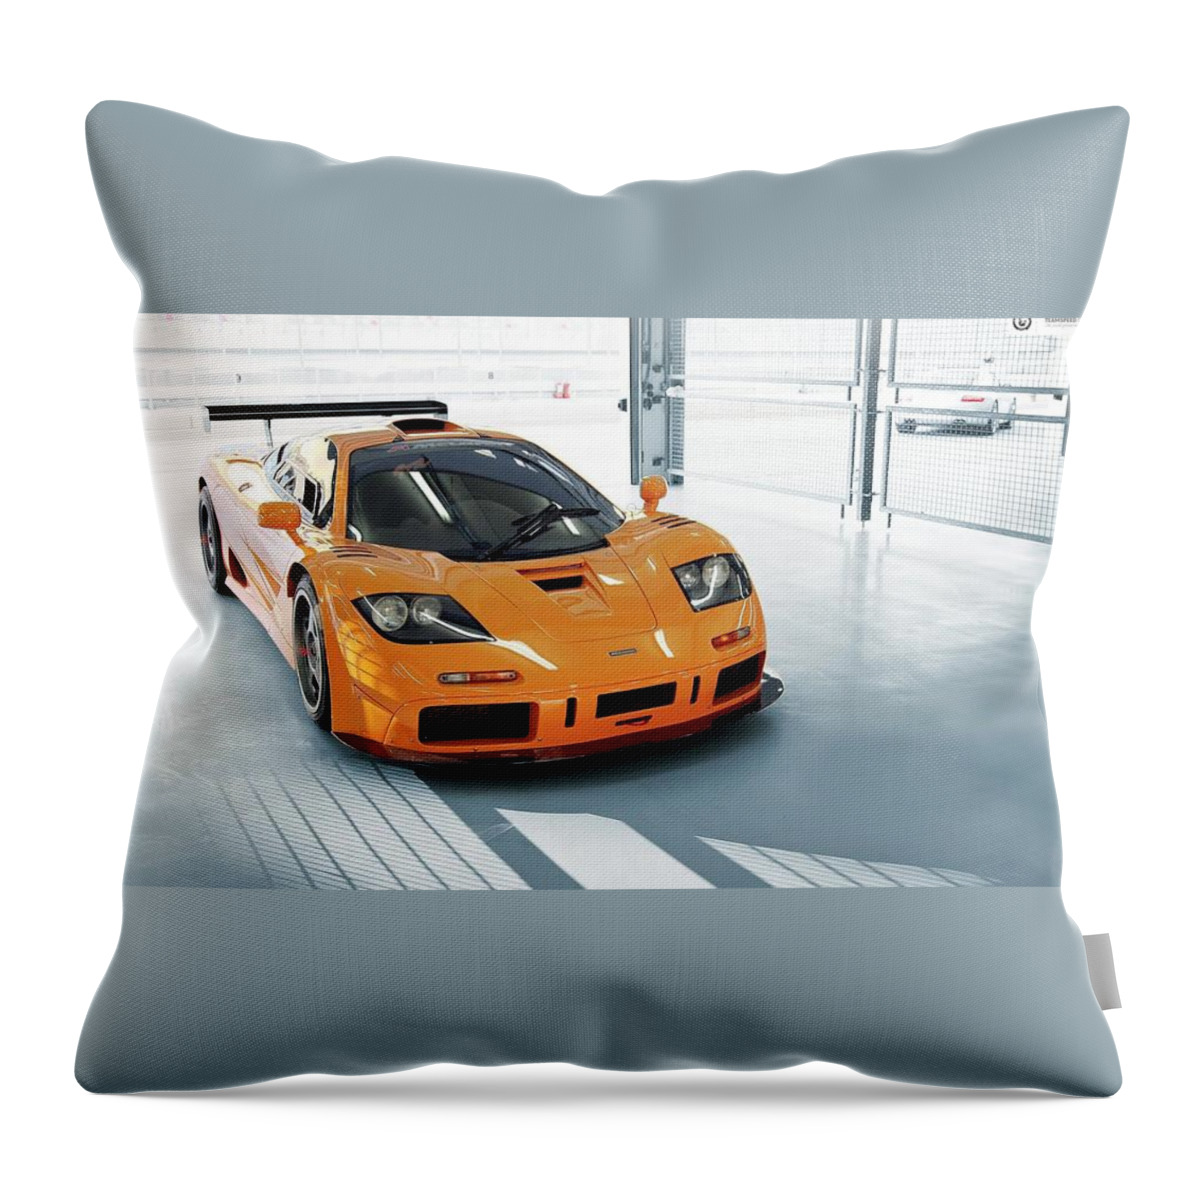 Mclaren F1 Throw Pillow featuring the photograph McLaren F1 by Jackie Russo